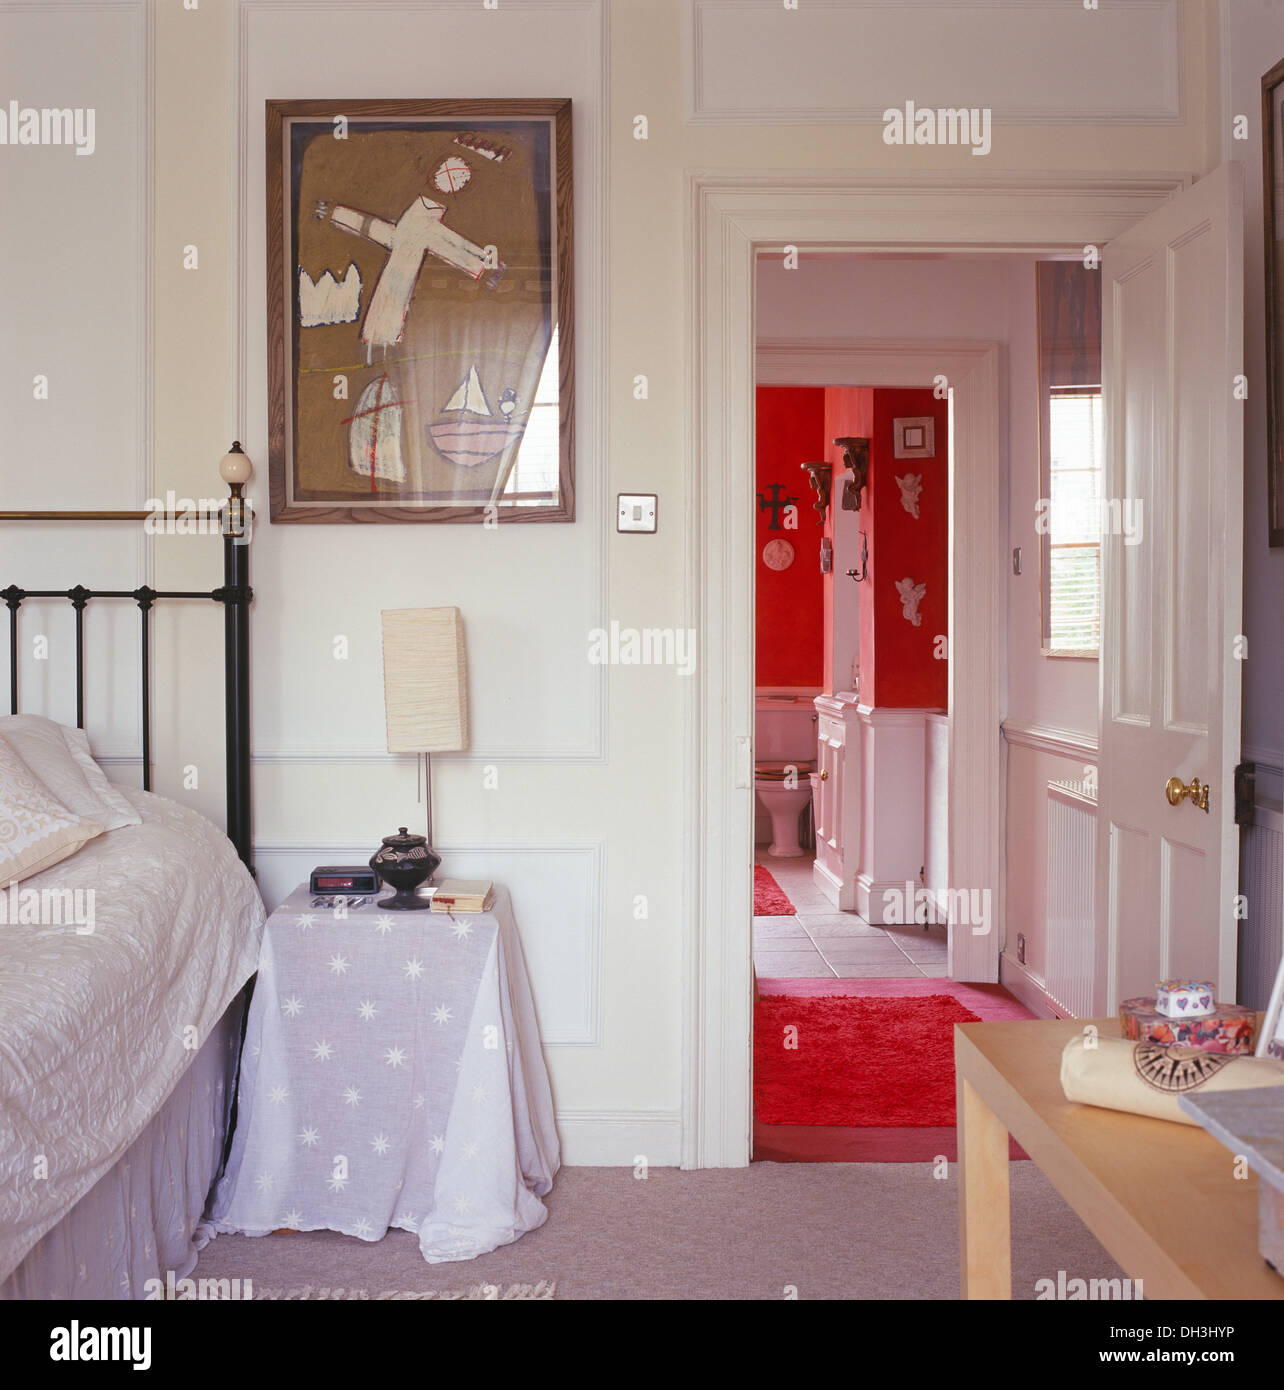 White paneled bedroom with pictures above bedside table with white cloth beside open door to red en-suite bathroom Stock Photo